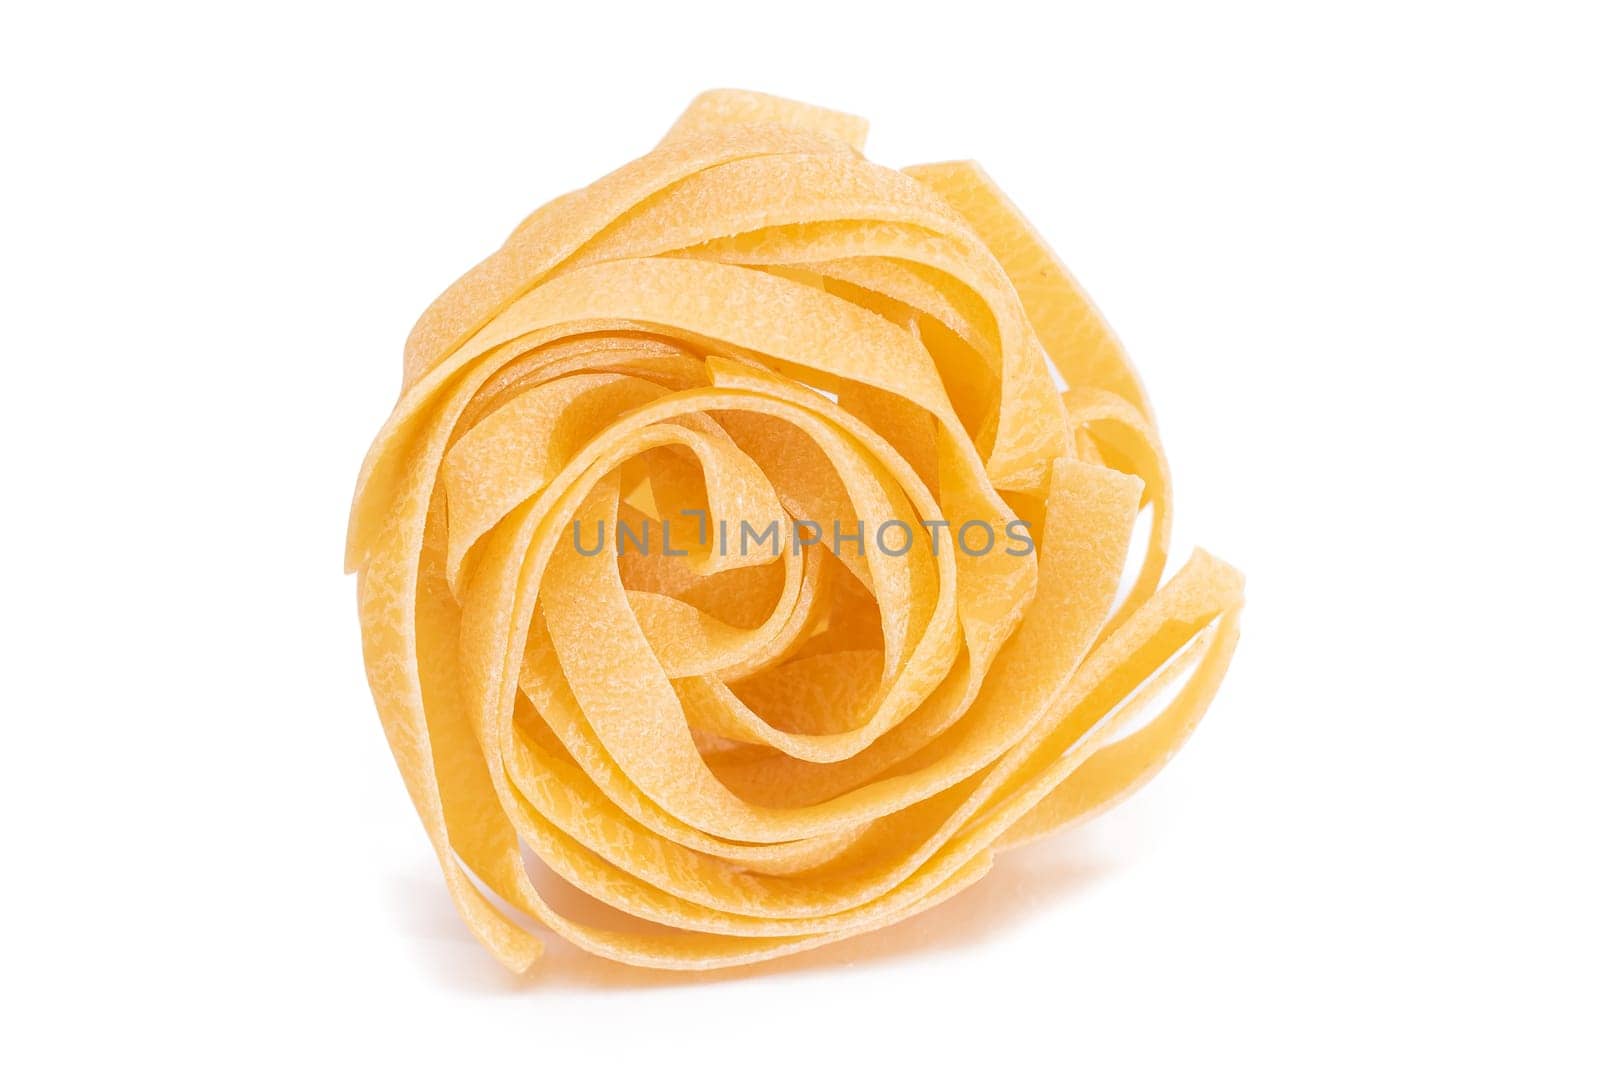 One Classic Italian Raw Egg Fettuccine - Isolated on White Background. Dry Twisted Uncooked Pasta. Italian Culture and Cuisine. Raw Golden Macaroni Pattern - Isolation